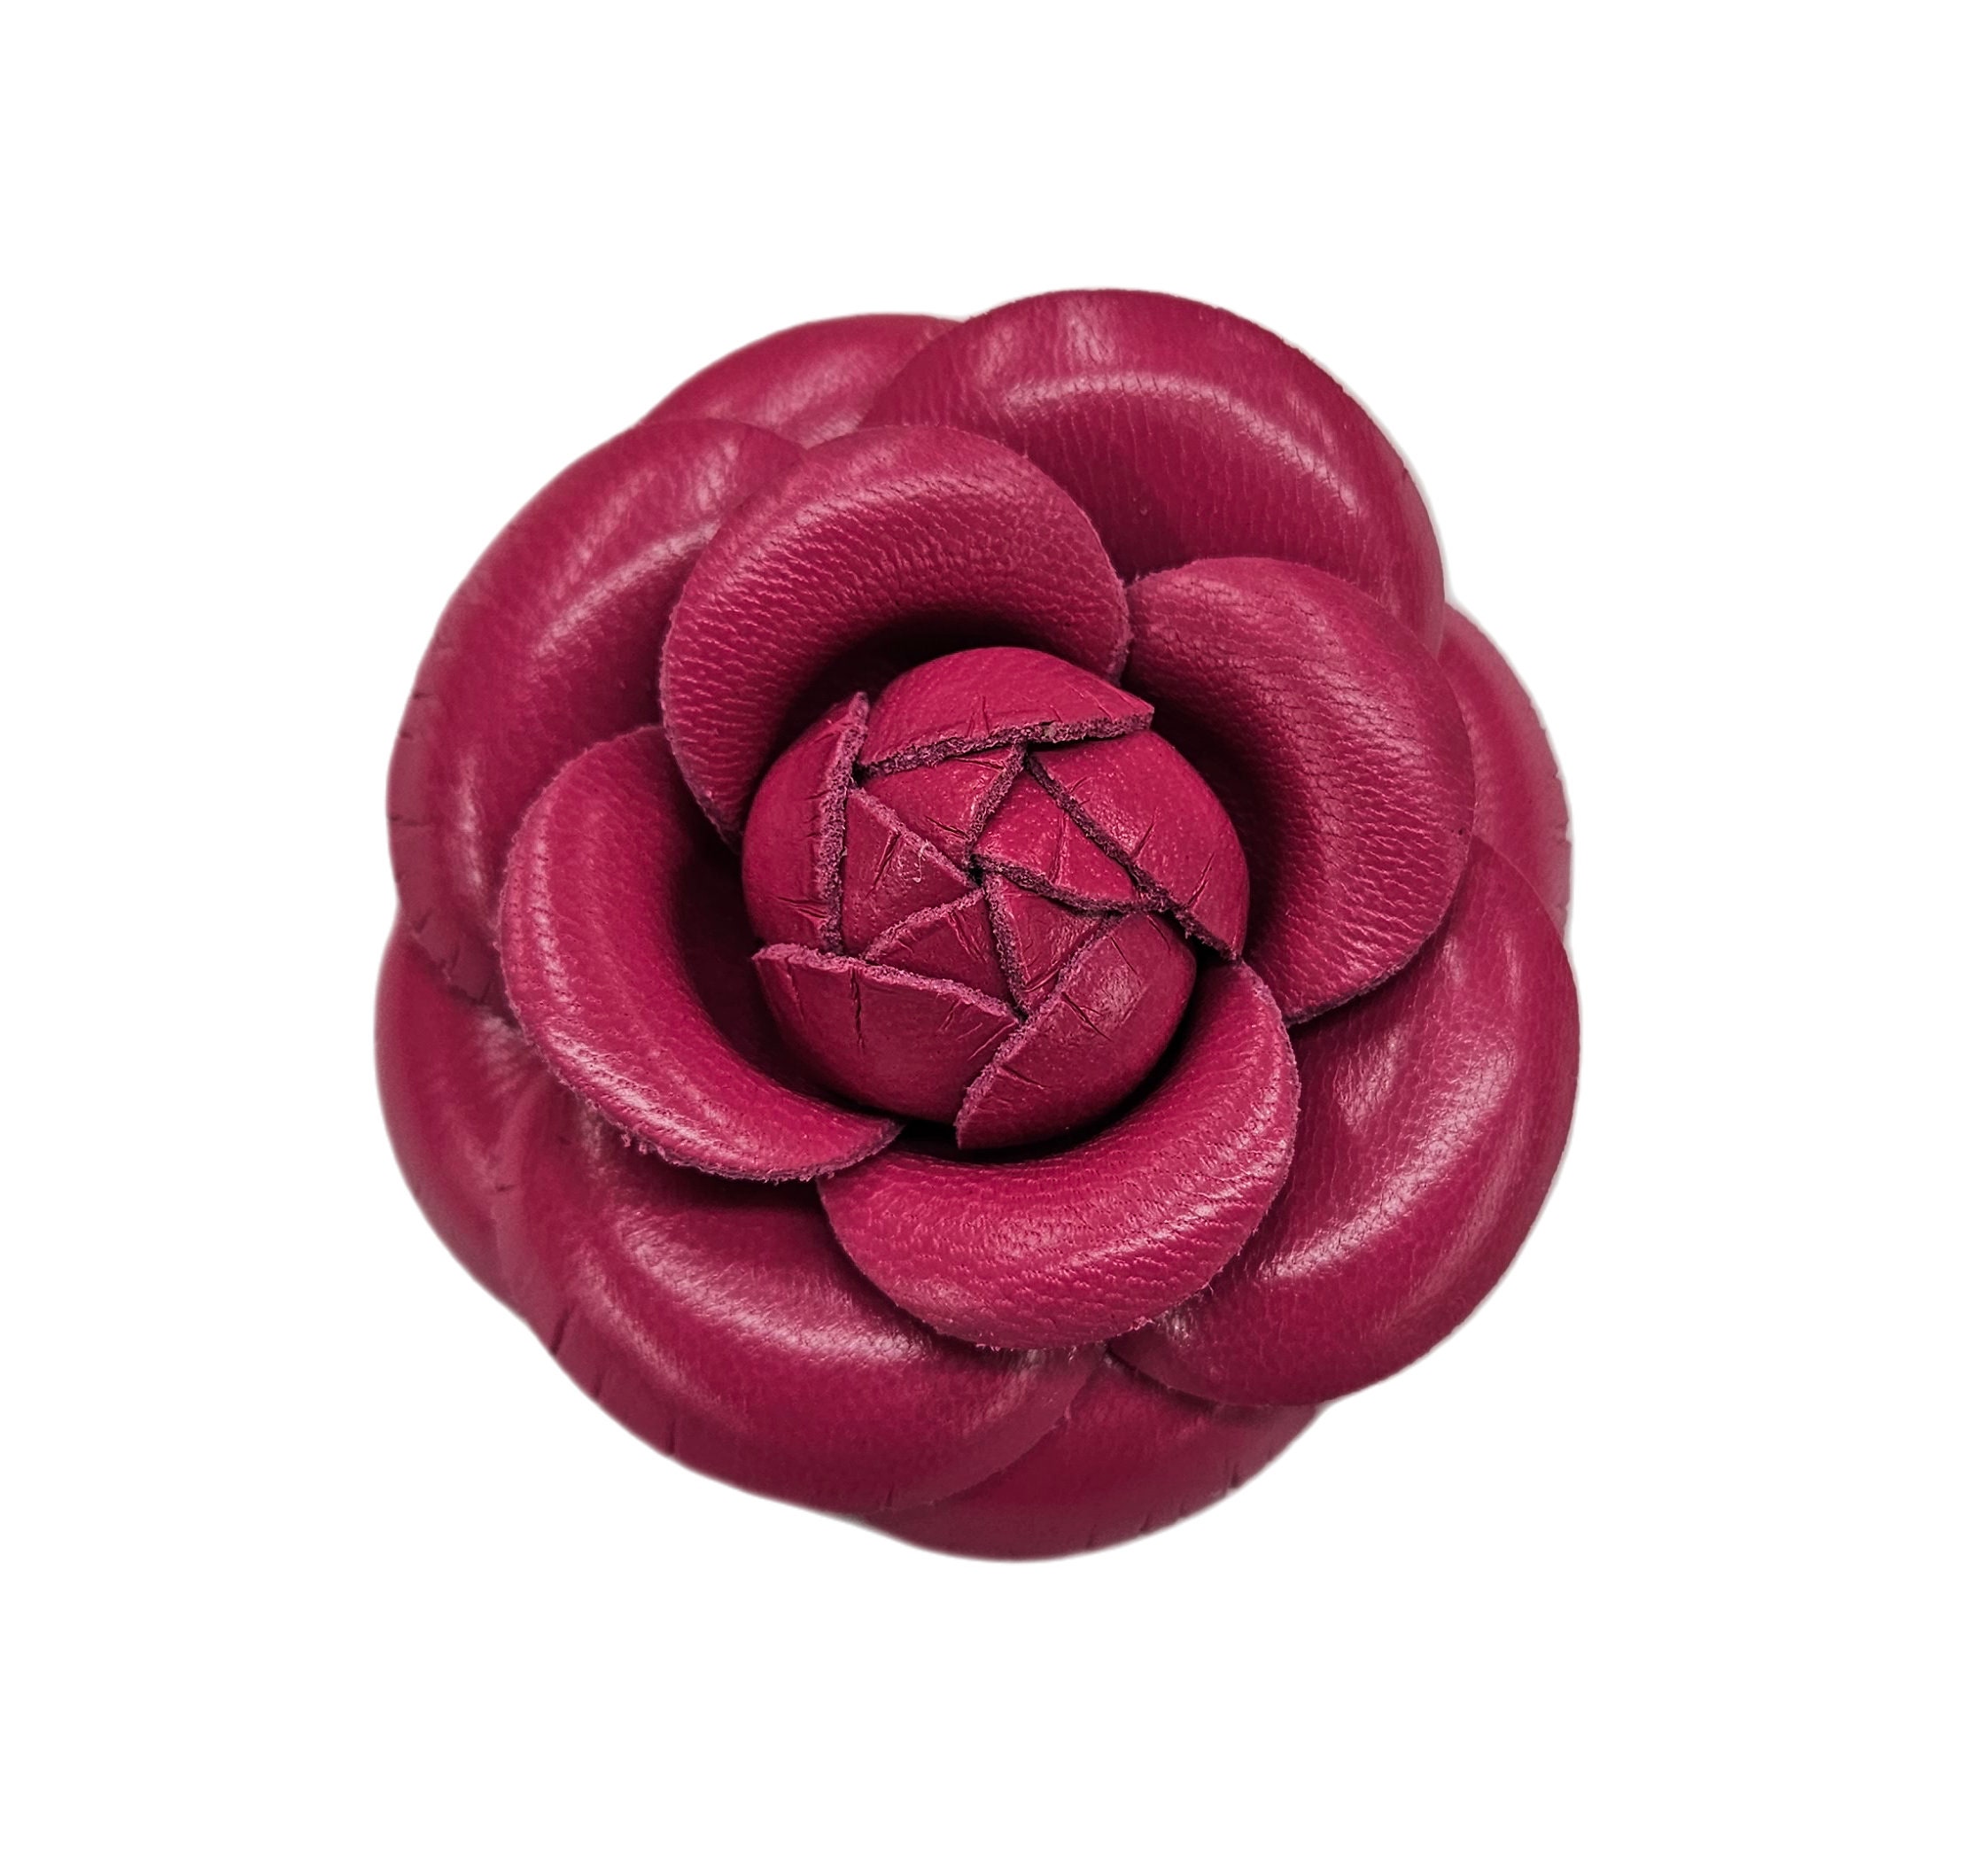 CHANEL Metallic Red White Camellia Flower Holiday Acrylic for brooch or pin  NEW